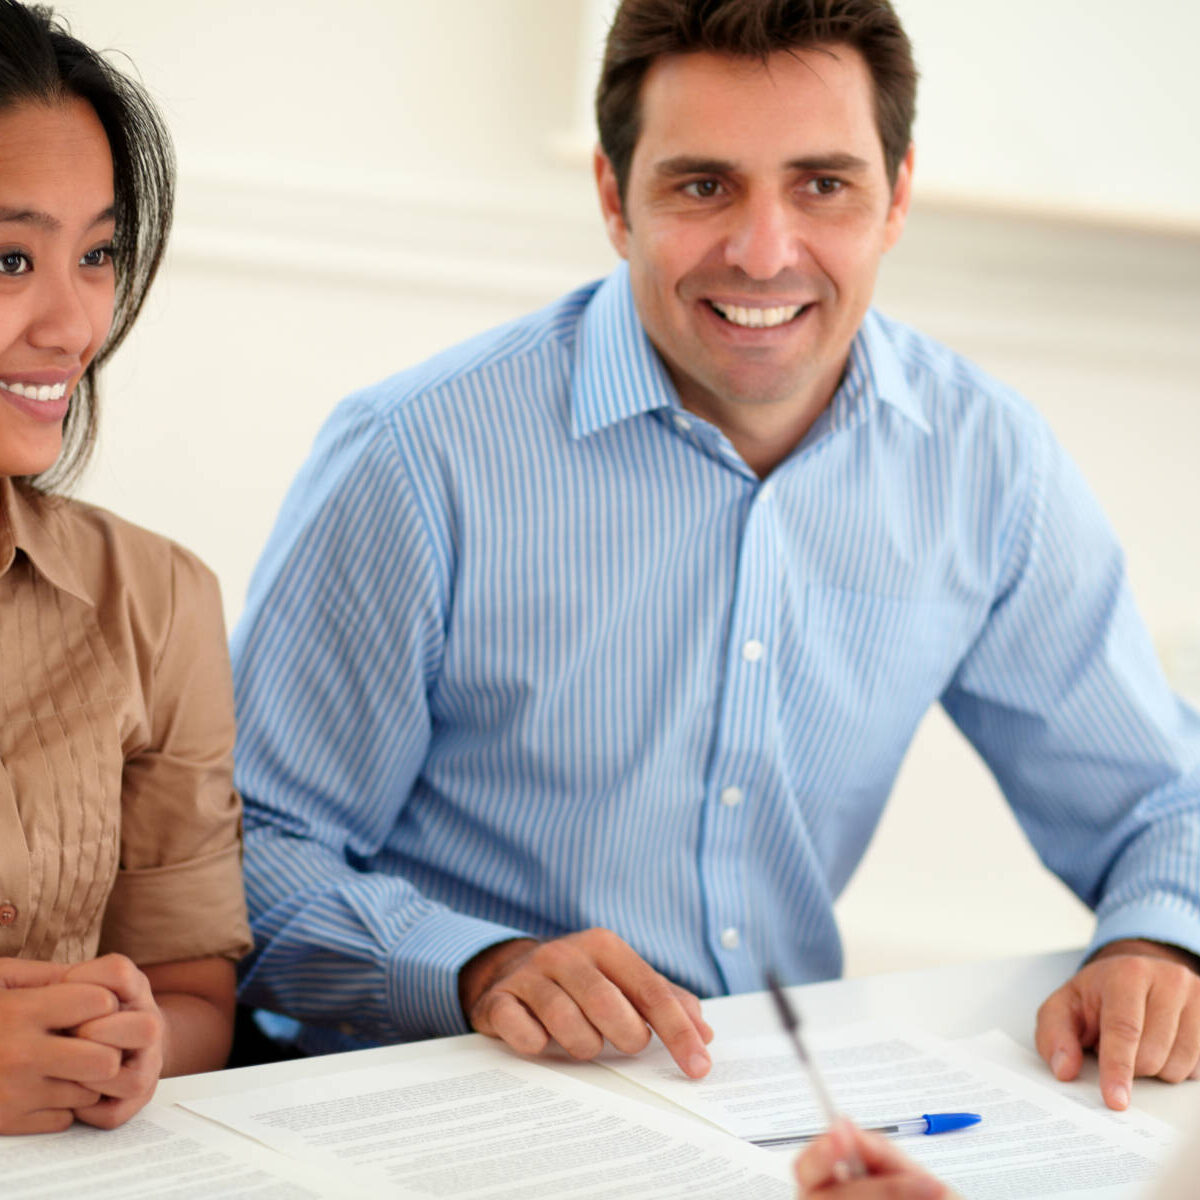 Portrait of young woman and man interested in a contract sitting and smiling on office desk